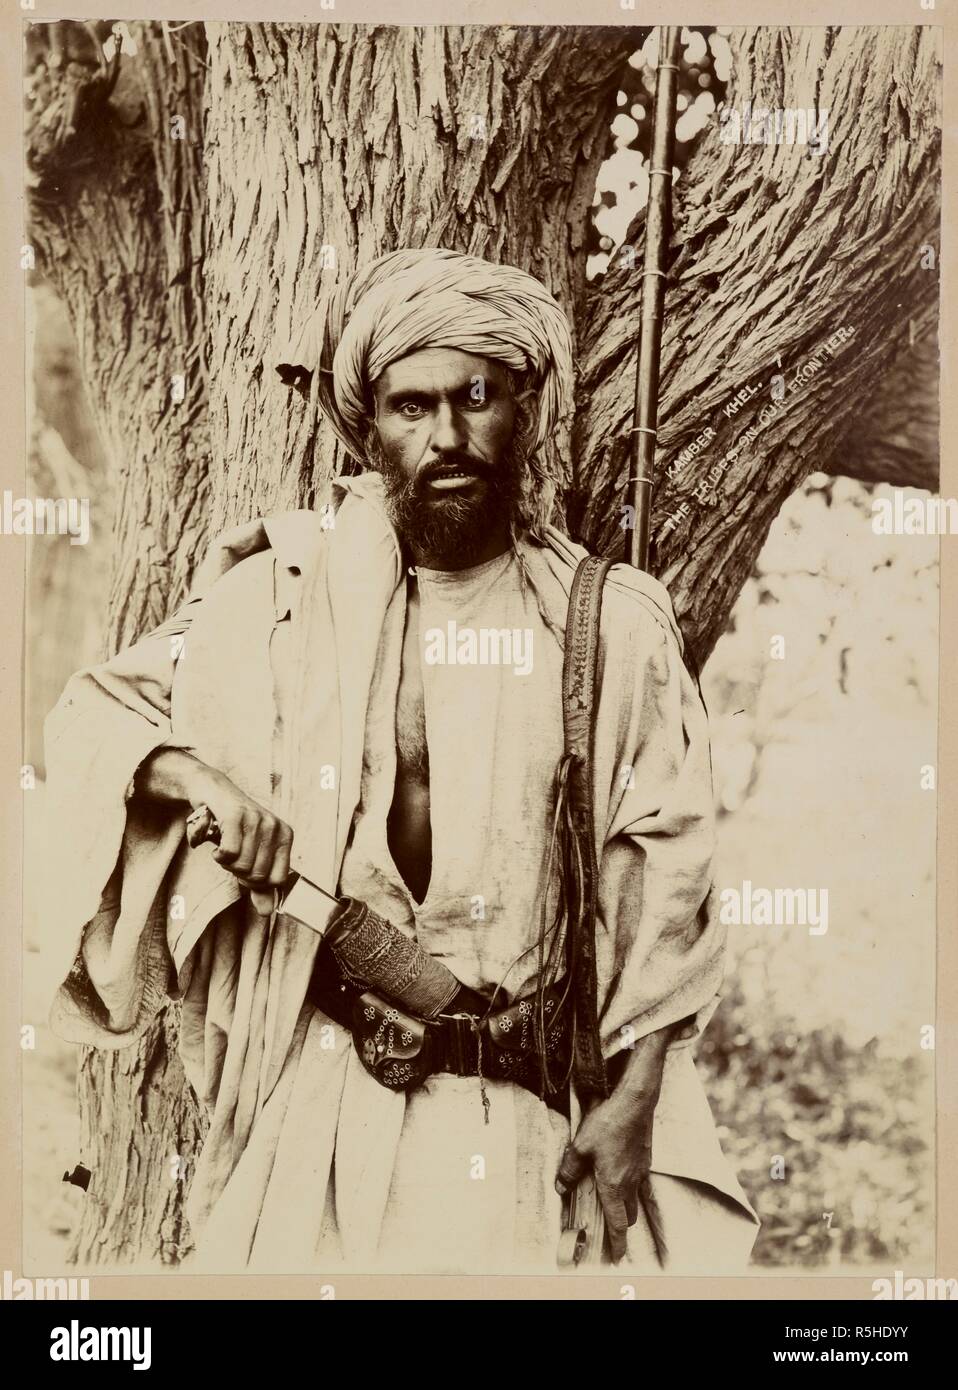 Kamber Khel. The tribes on our frontier. A half-length portrait of a Kambar Khel man, posed in the act of drawing a knife from a sheath at his waist. The Kambar Khels are a sub-division of the Afridis, numbering some 4,500 fighting men at the turn of the century . Photograph Album of Josephine Eppes: Views of India and Hong Kong. 1890s. Photograph. Source: Photo 867/2(1). Author: UNKNOWN. Stock Photo